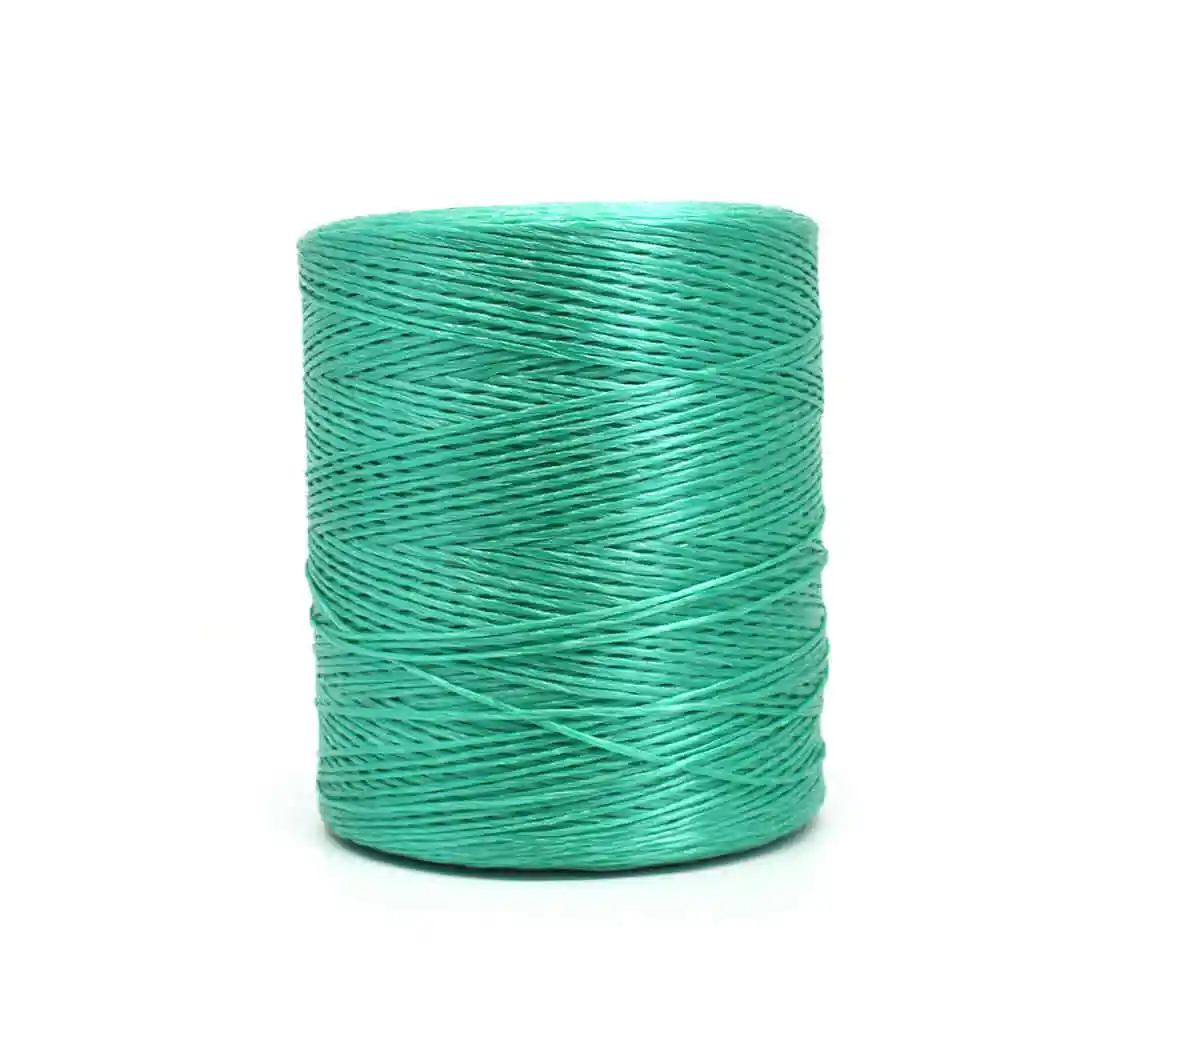 210d/36 Ply Polypropylene Multifilament Twine PP String Rope Thread - China  Brick Line and Fishing Net Repair Twine price